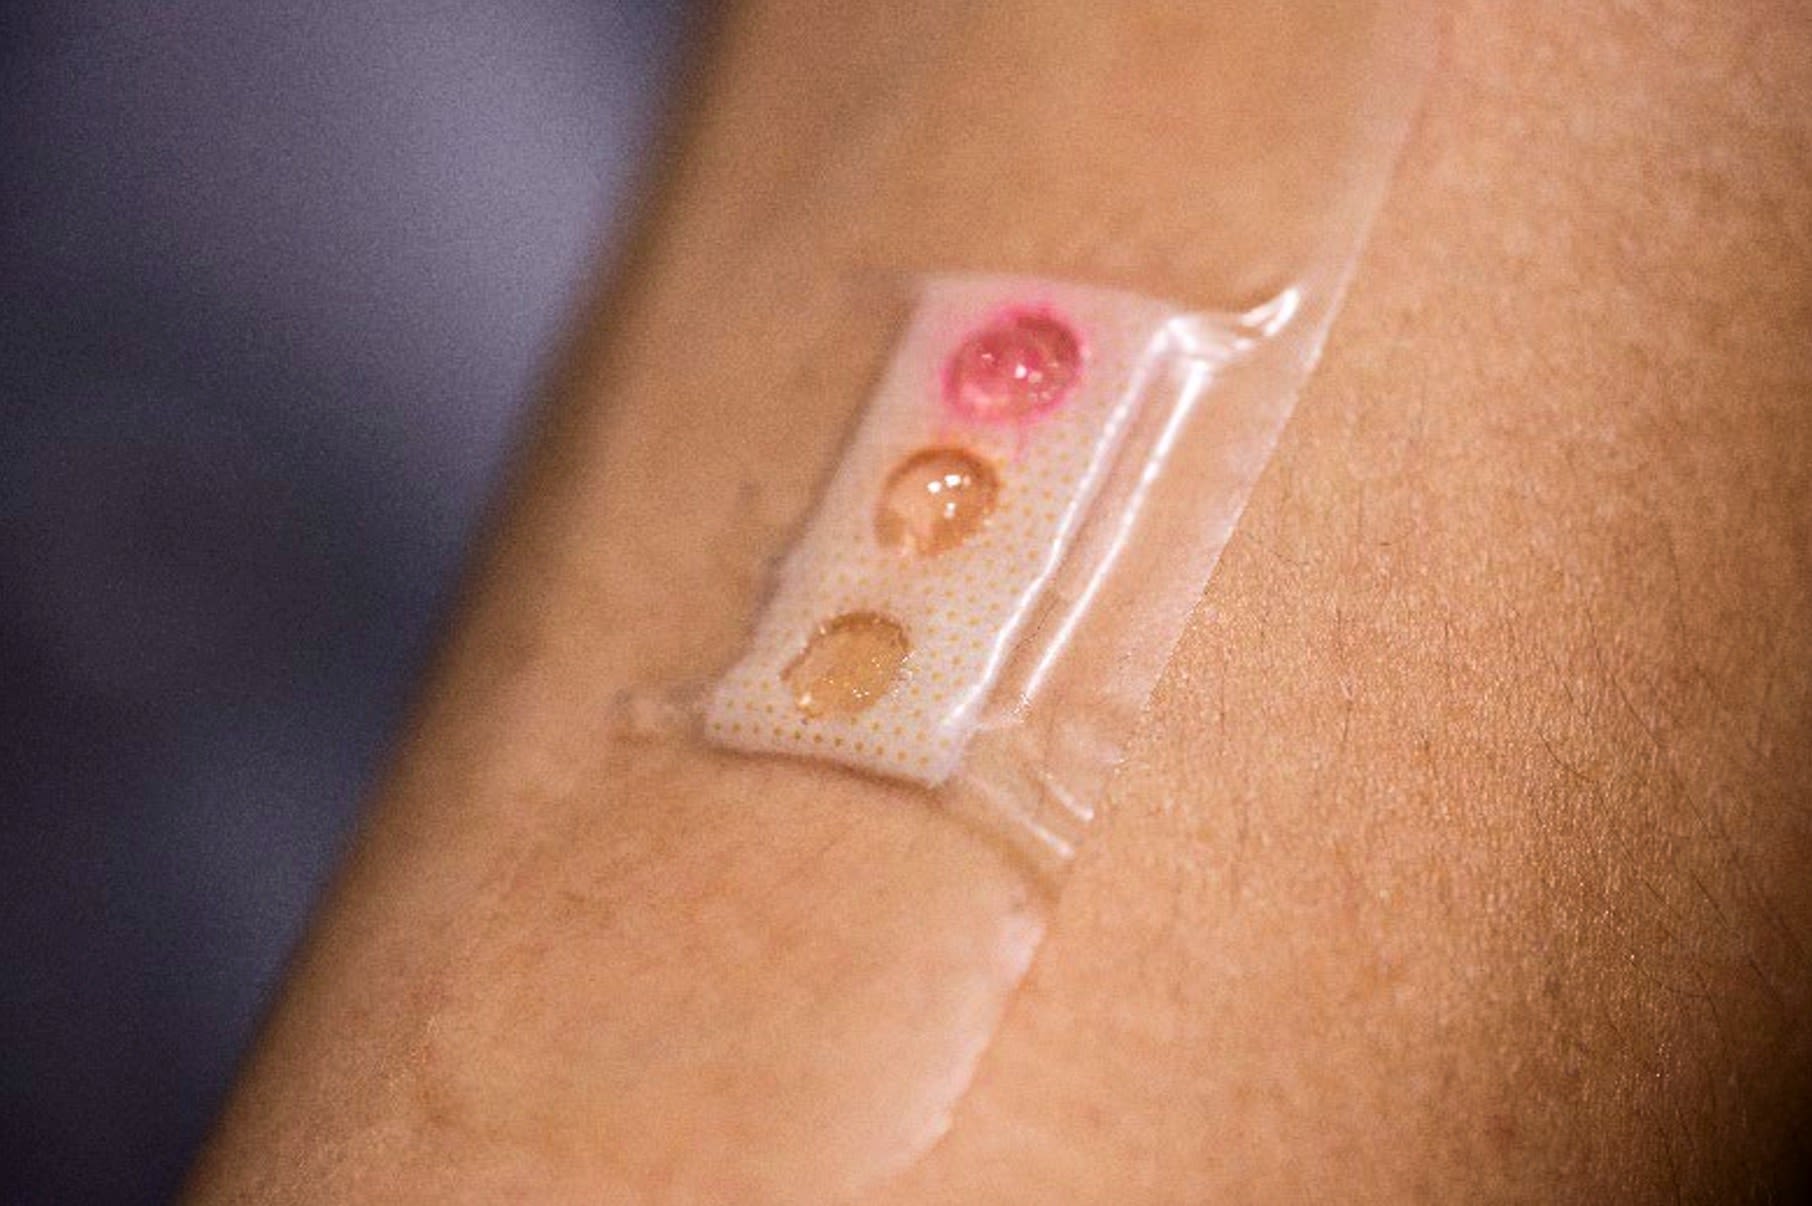 This tiny patch could be the future of wearable technology